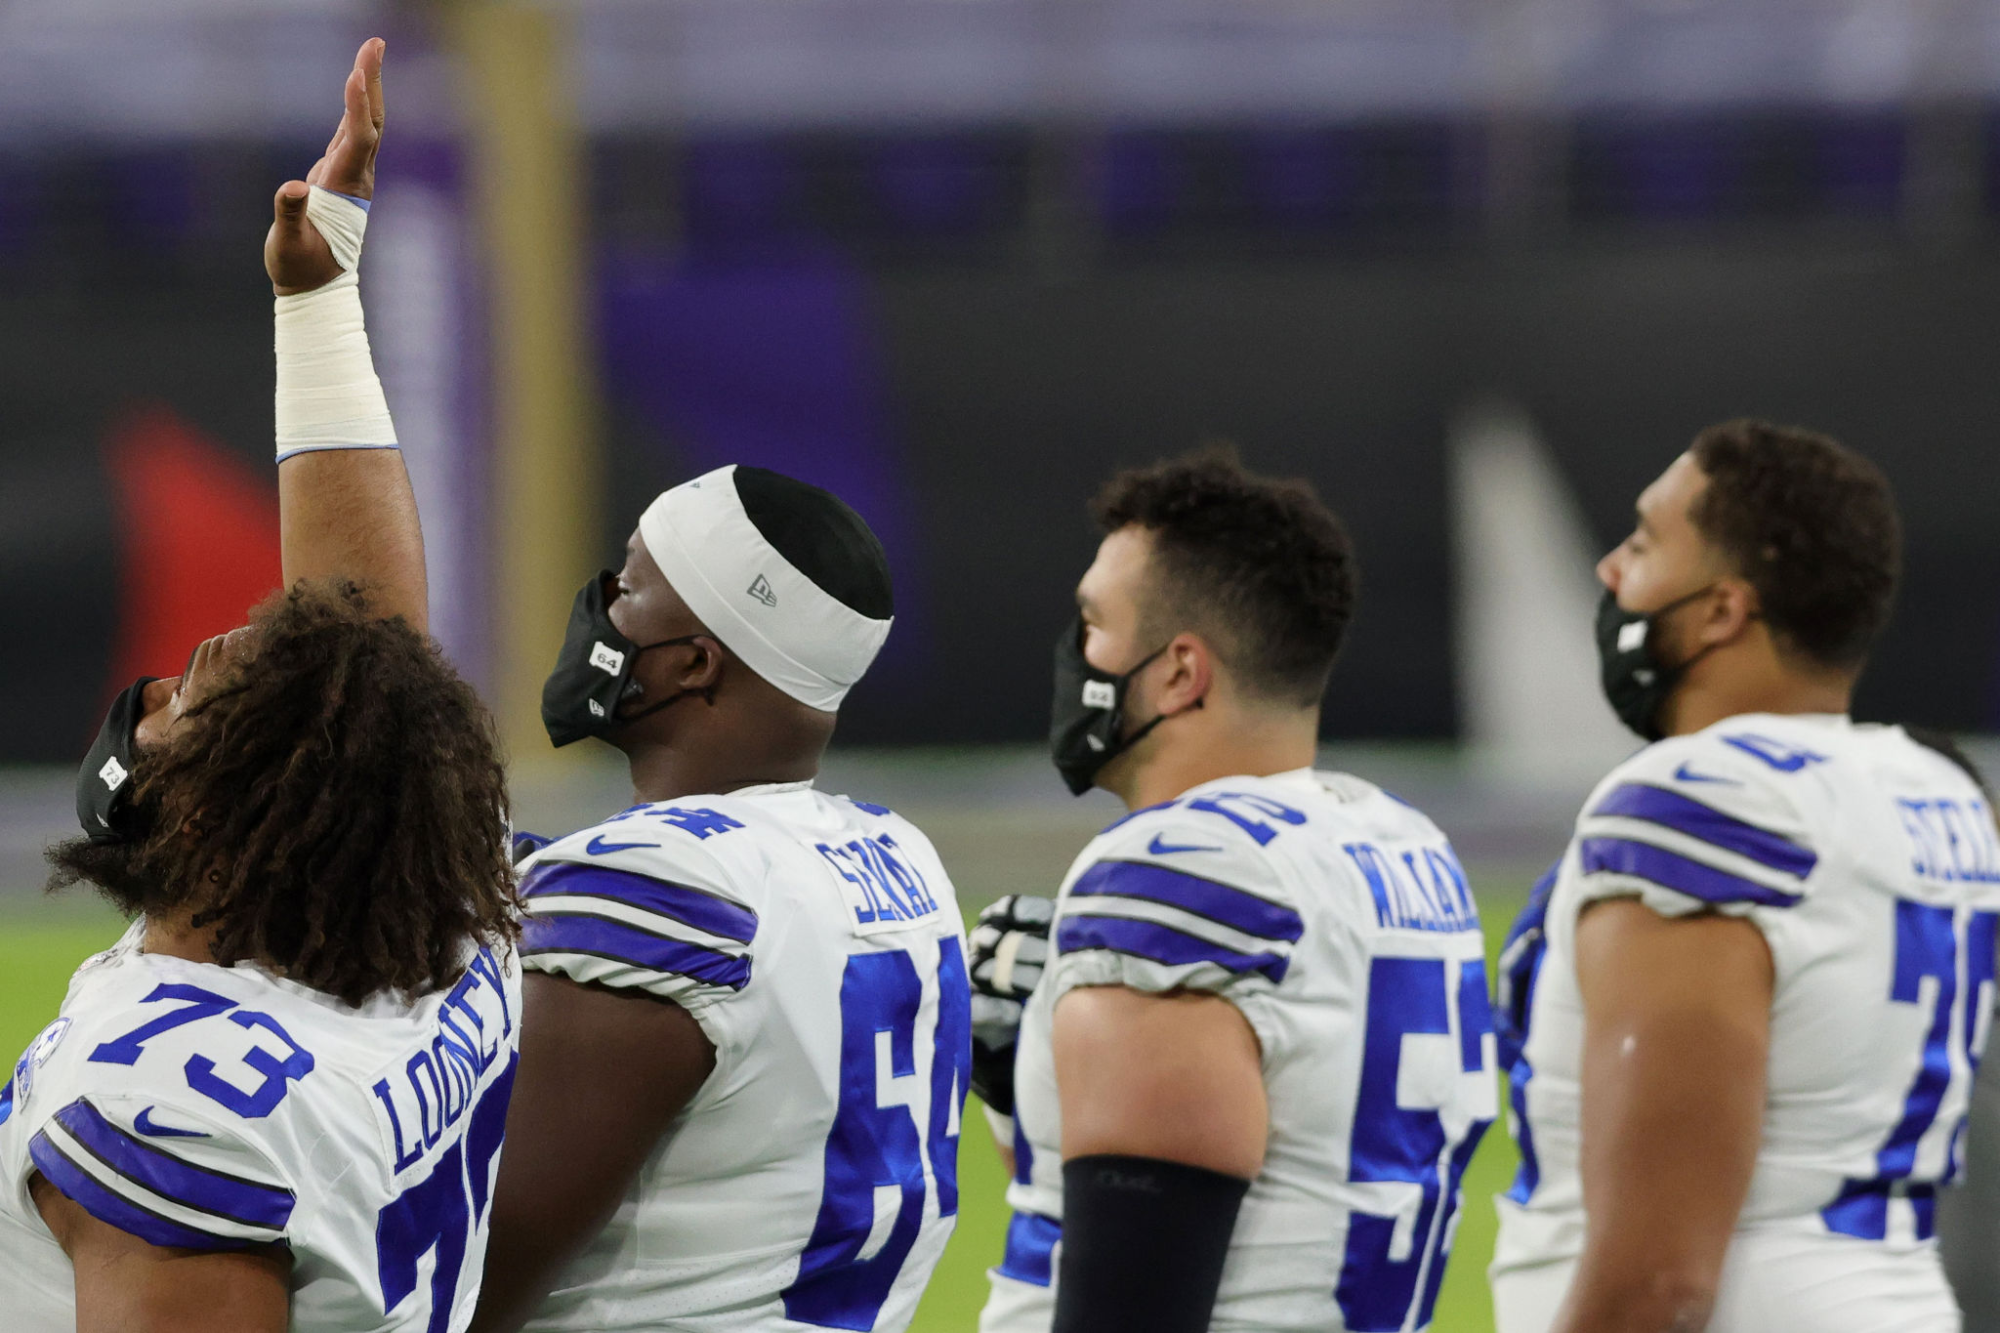 Dallas Cowboys center Joe Looney raises his hand into the air during the national anthem.